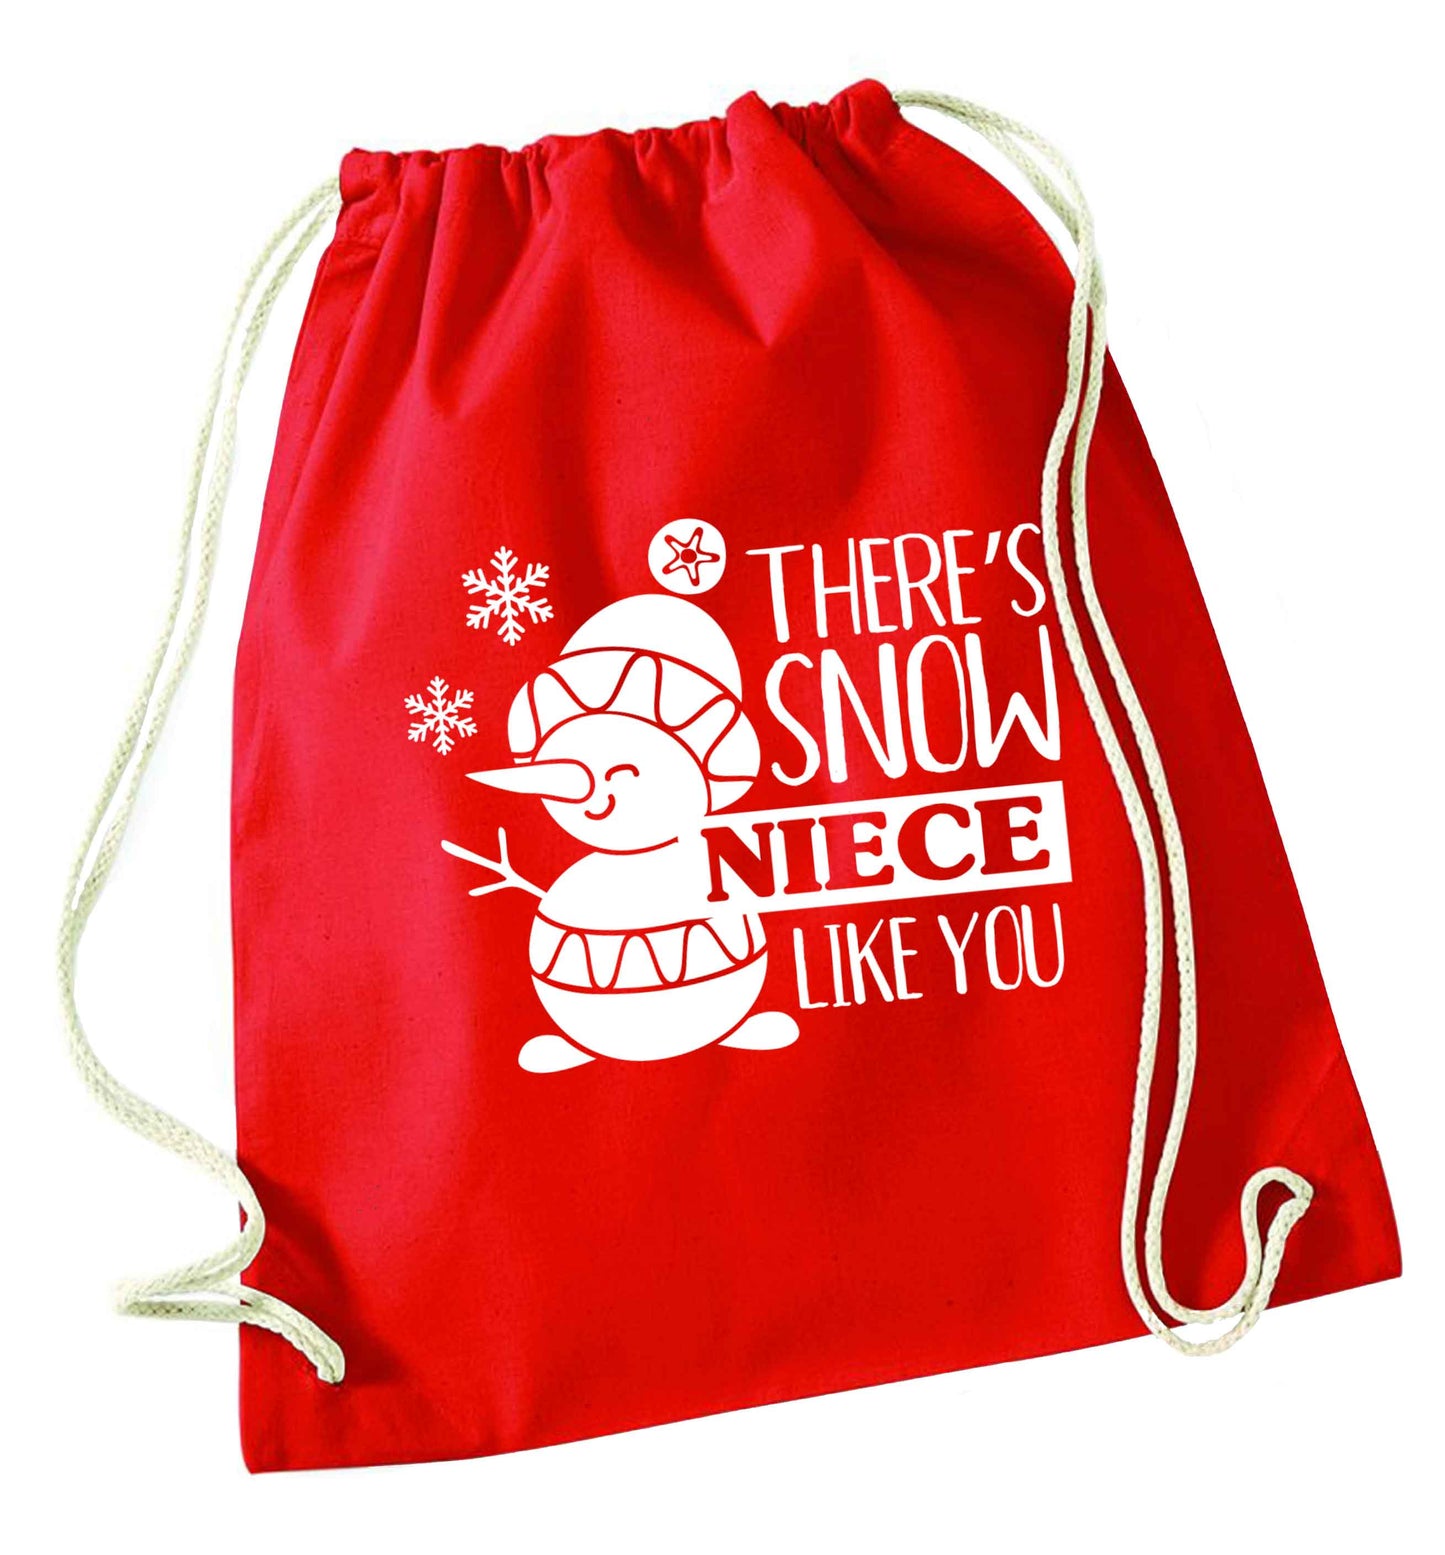 There's snow niece like you red drawstring bag 